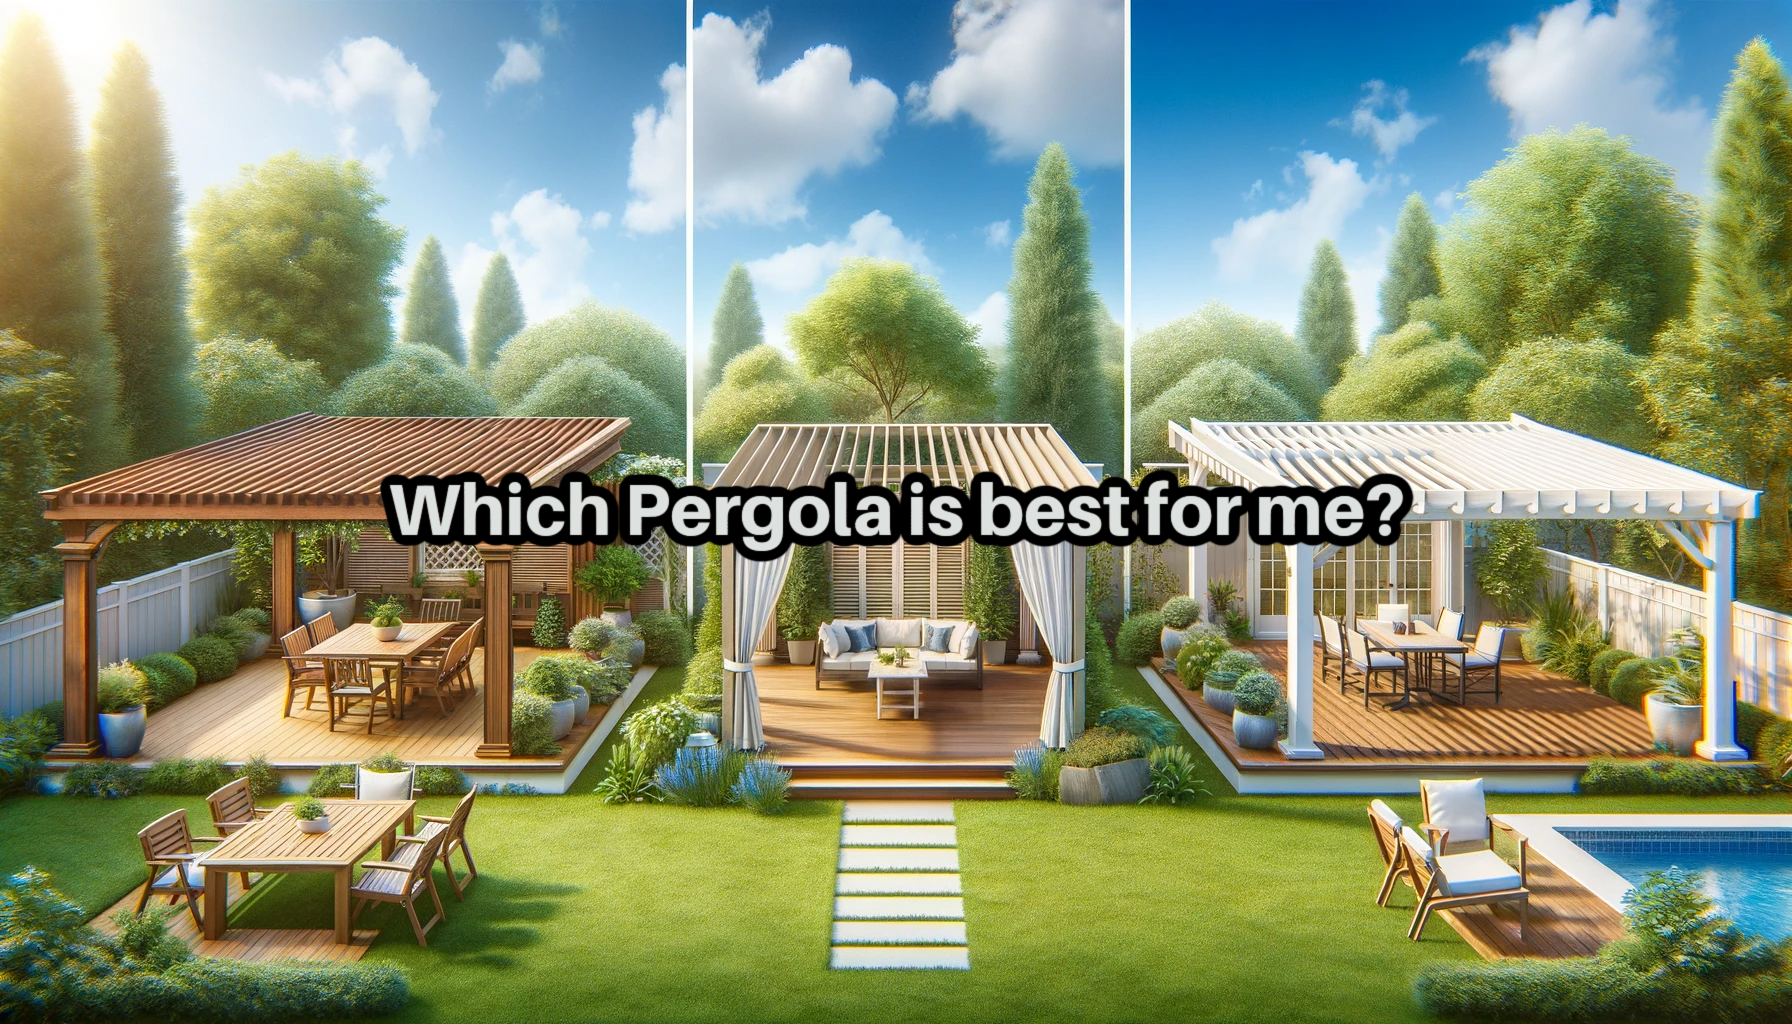 Which Pergola is best for me?